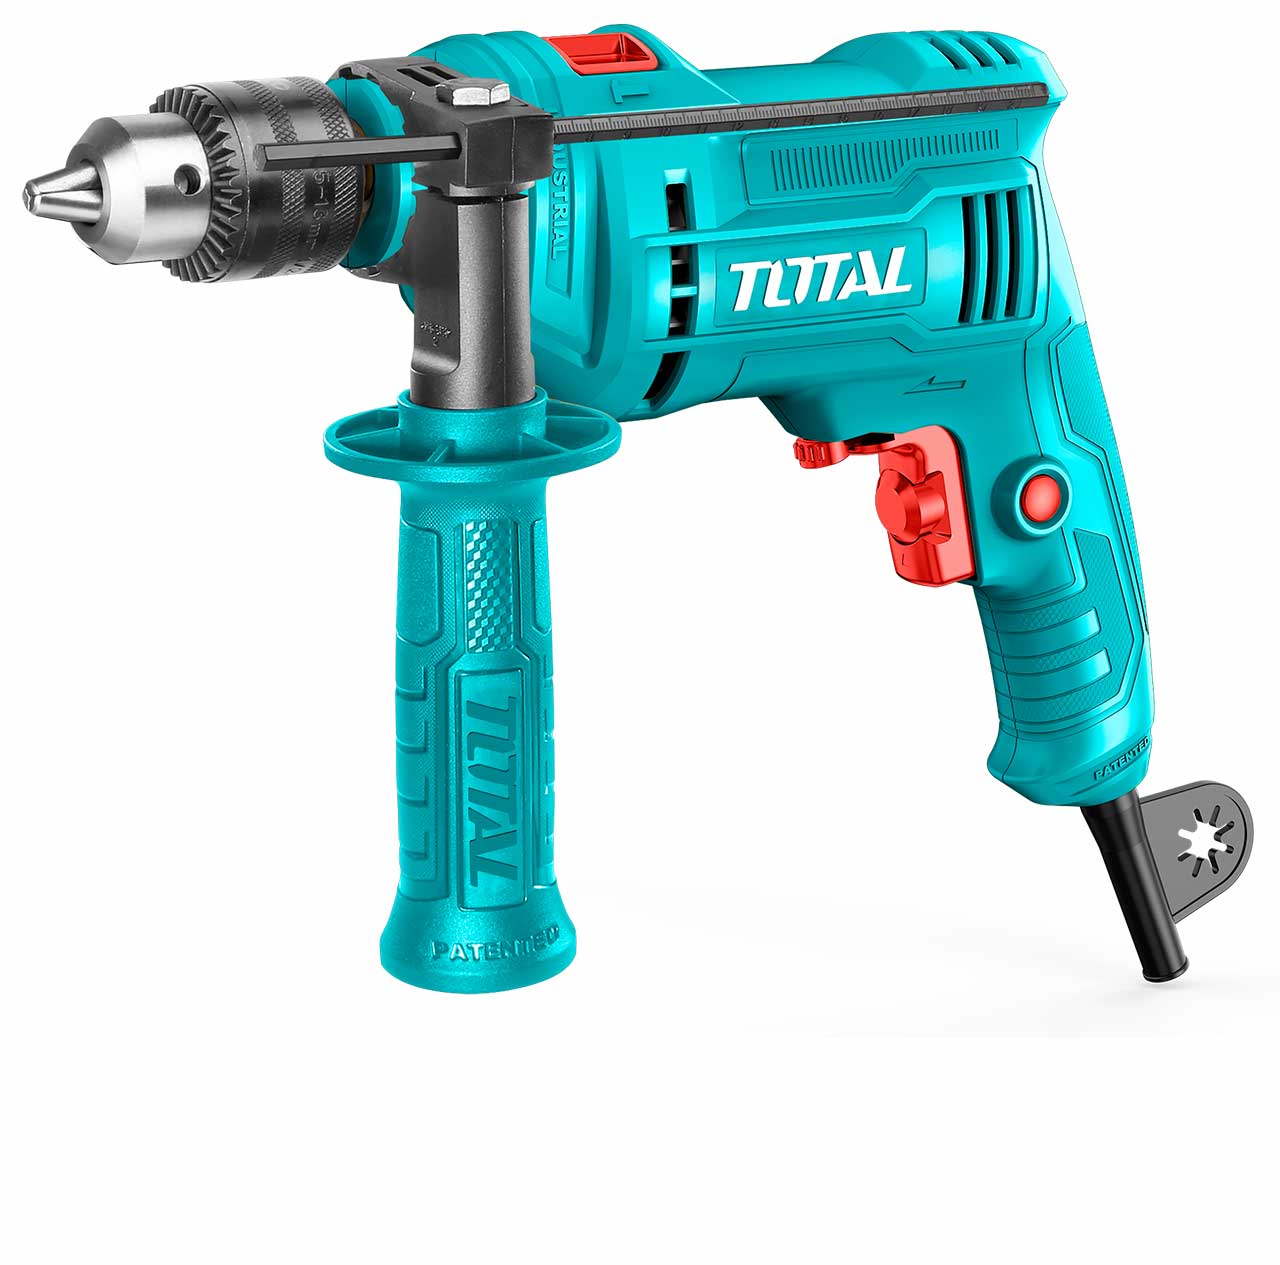 Total Hammer Impact Drill 710W - TG107136 | Supply Master | Accra, Ghana Drill Buy Tools hardware Building materials